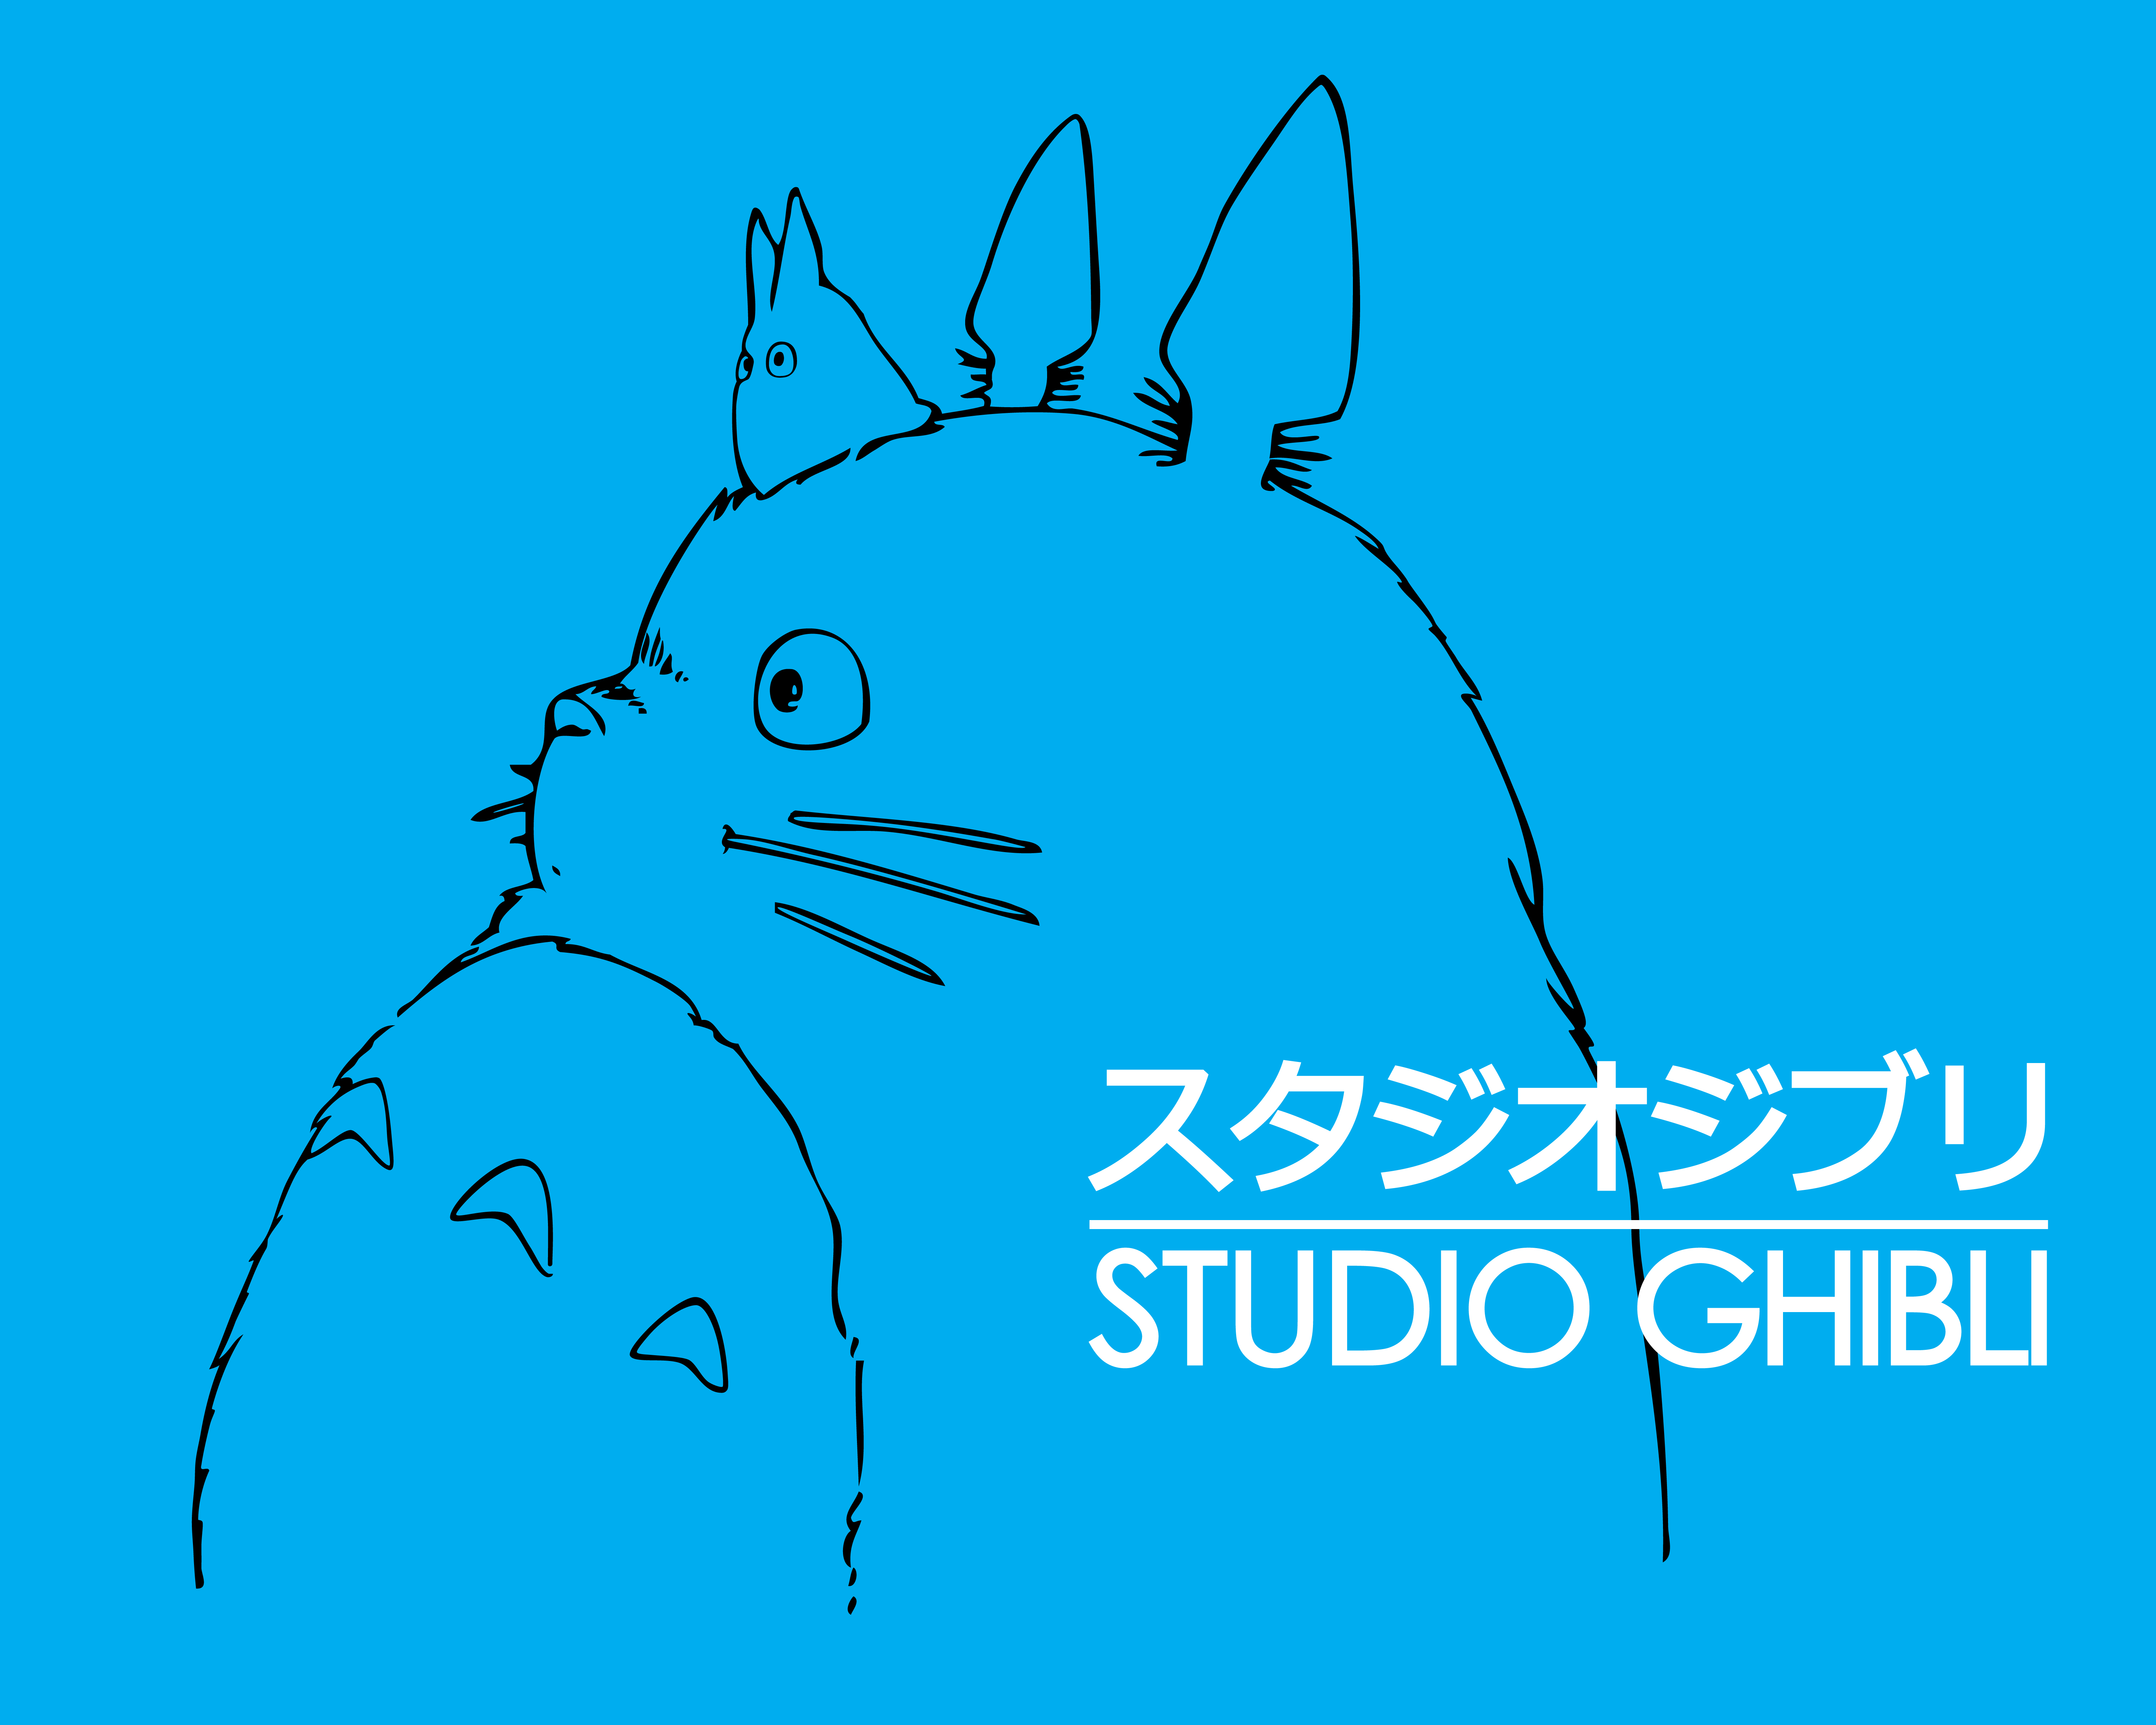 The List of Top 12 Anime Films for Studio Ghibli Fans